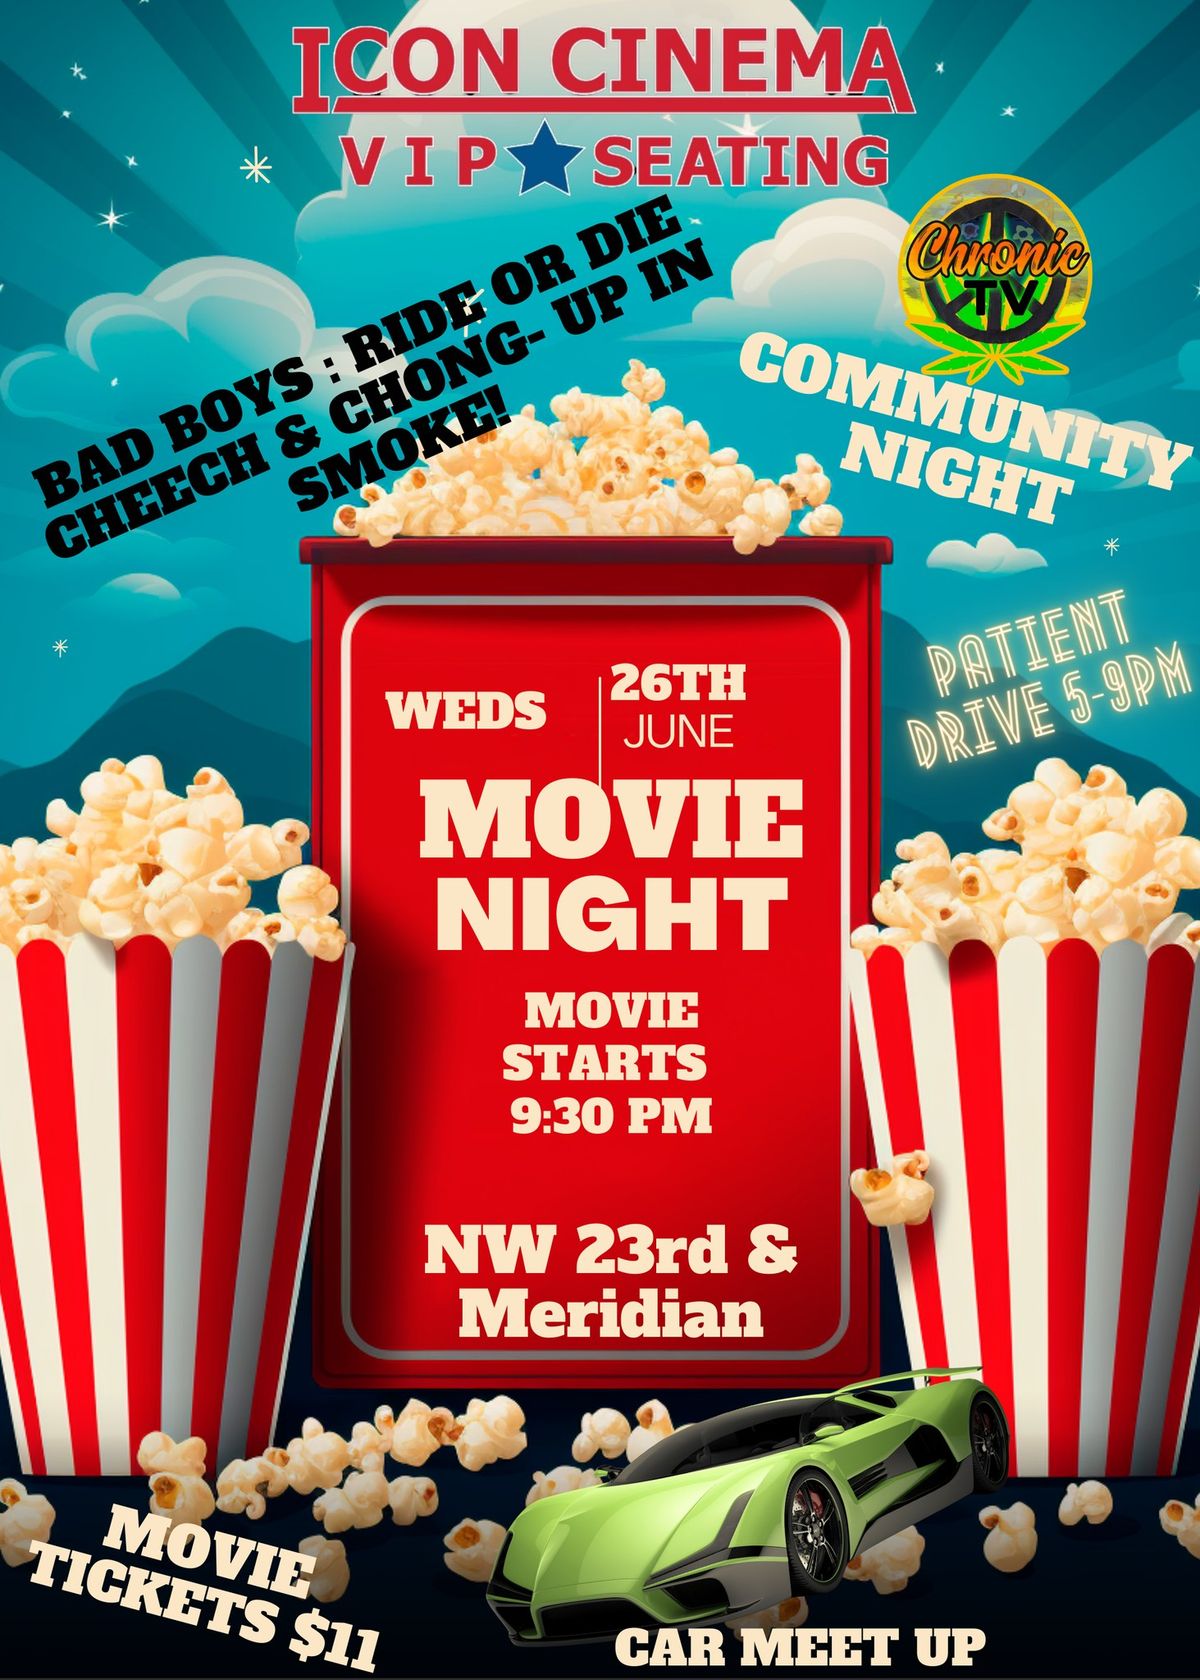 Movie Night- Community Event at Icon Cinema-NW 23rd and Meridian-Sponsored by Chronic Docs